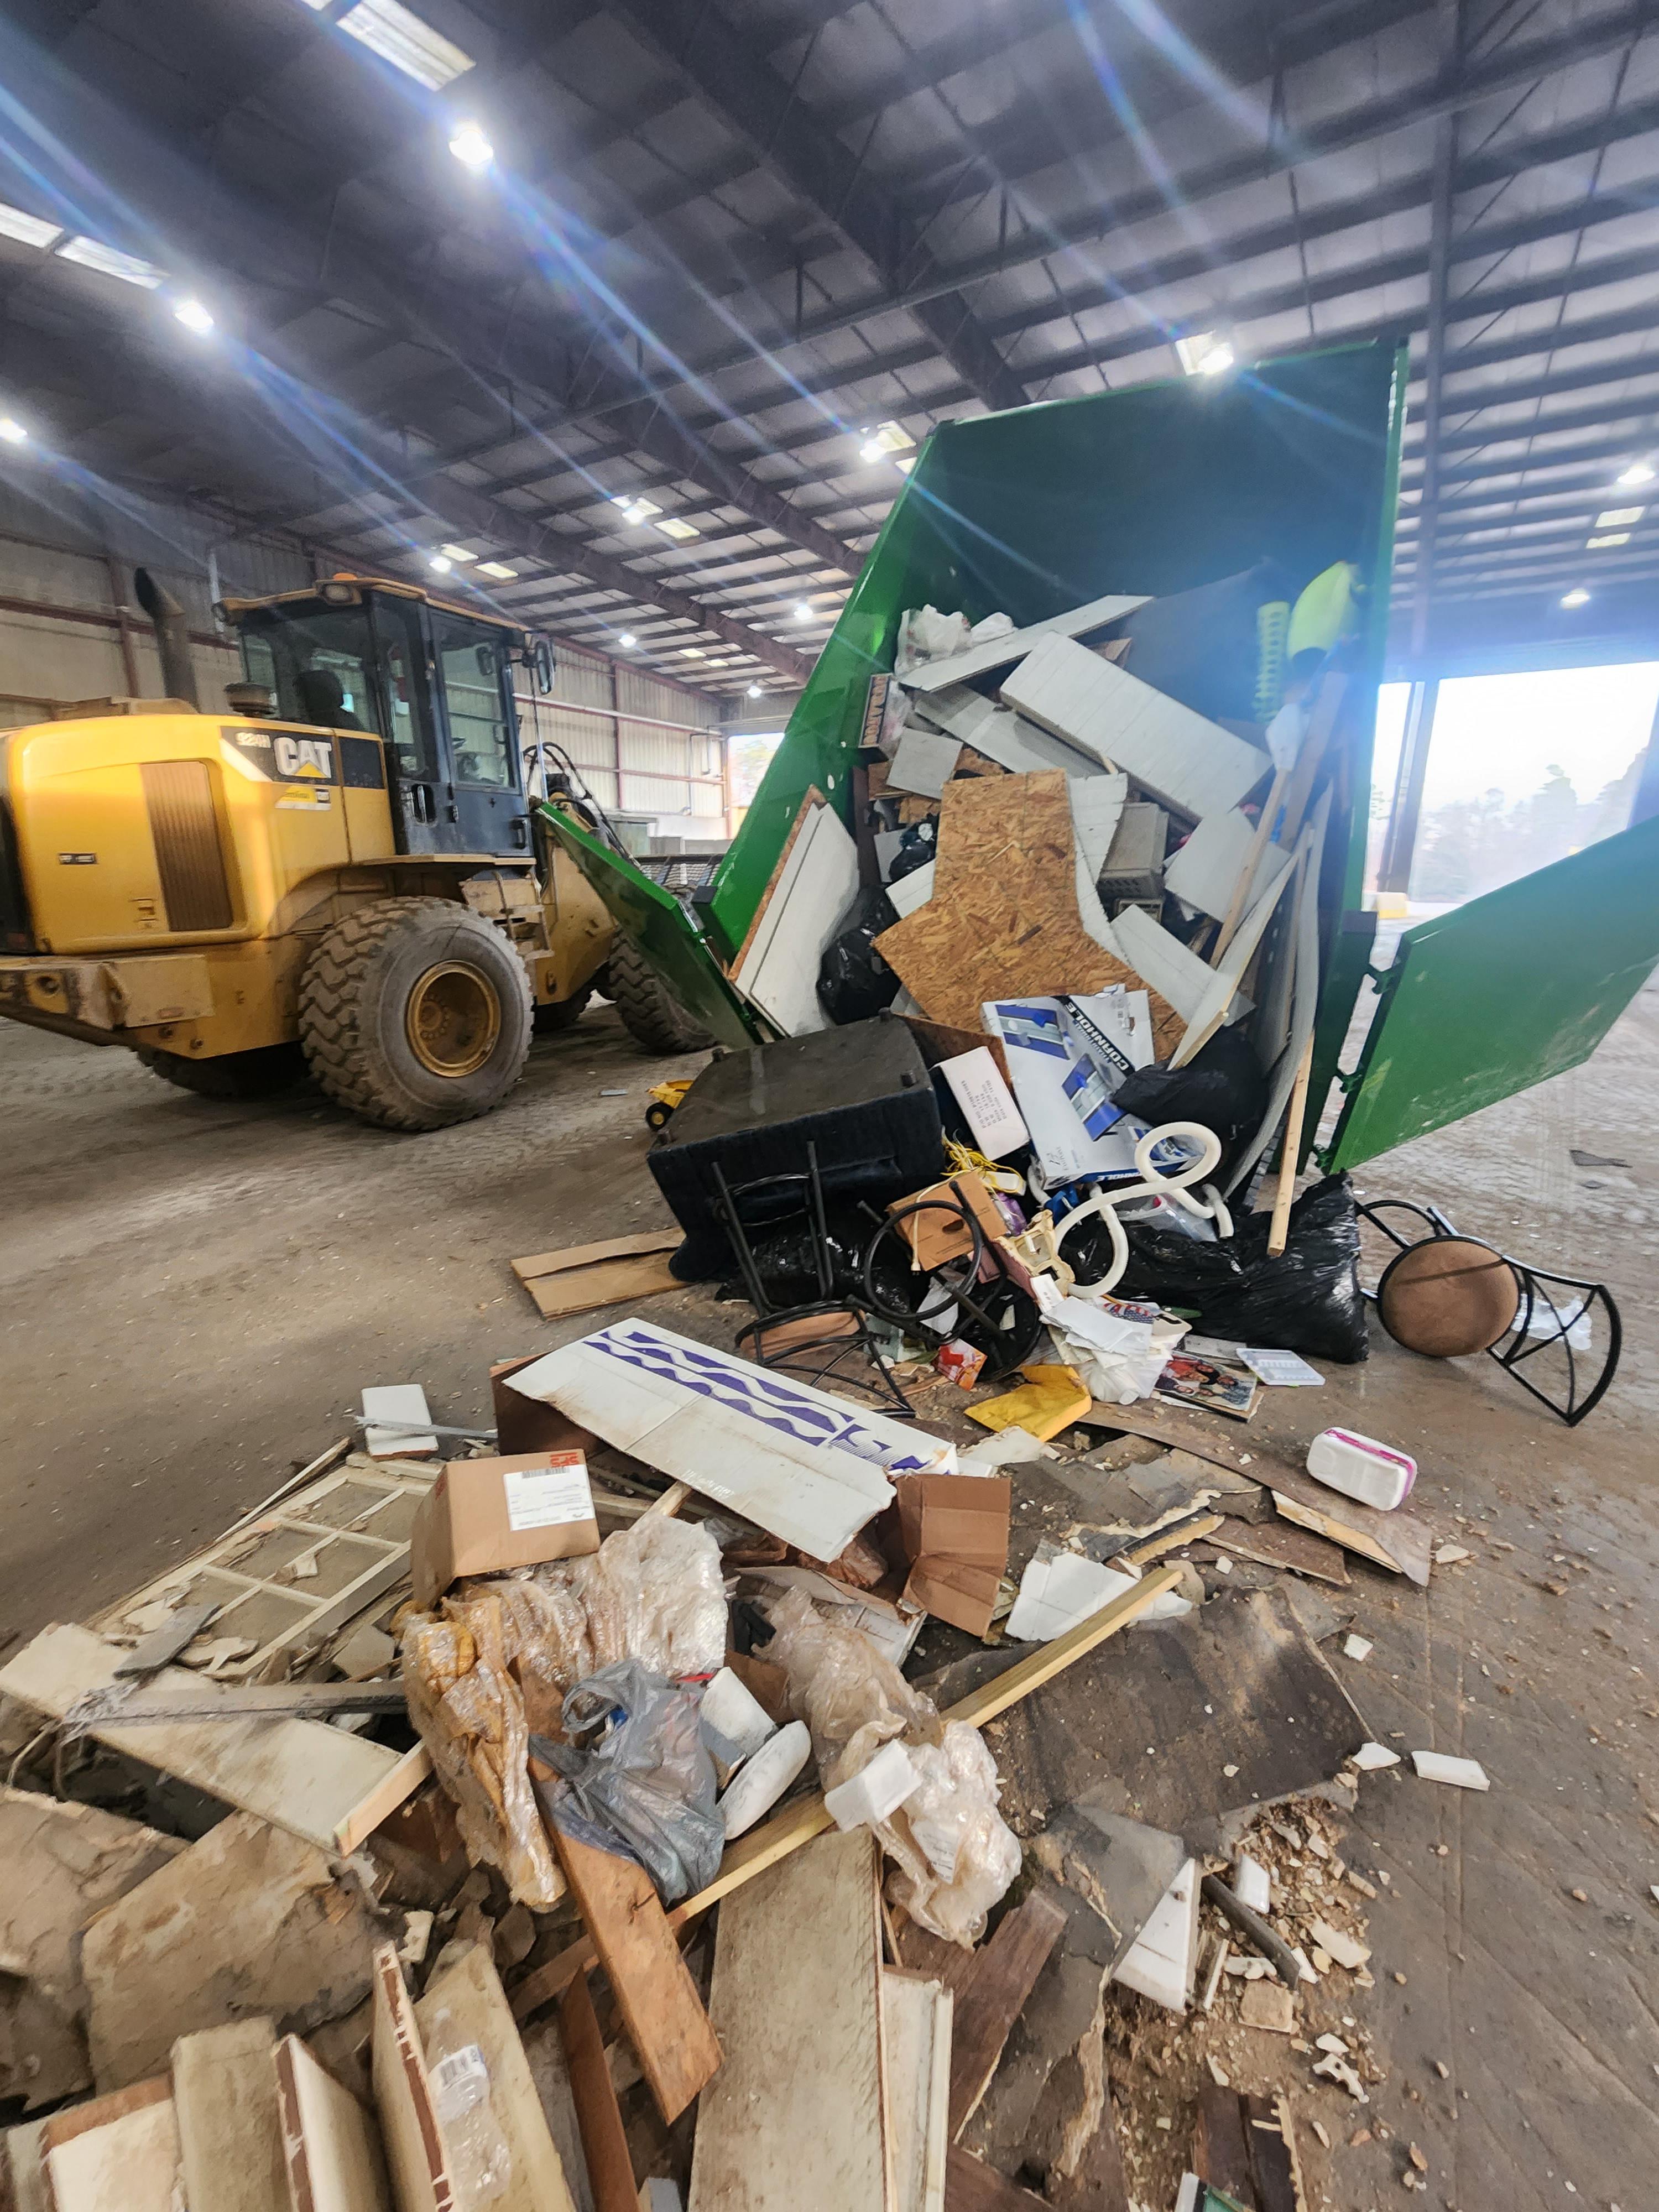 Fill-A-Bin Dumpster Rental & Junk Removal in Statesville, NC, offers convenient dump rental services, providing an efficient solution for waste disposal on your terms.